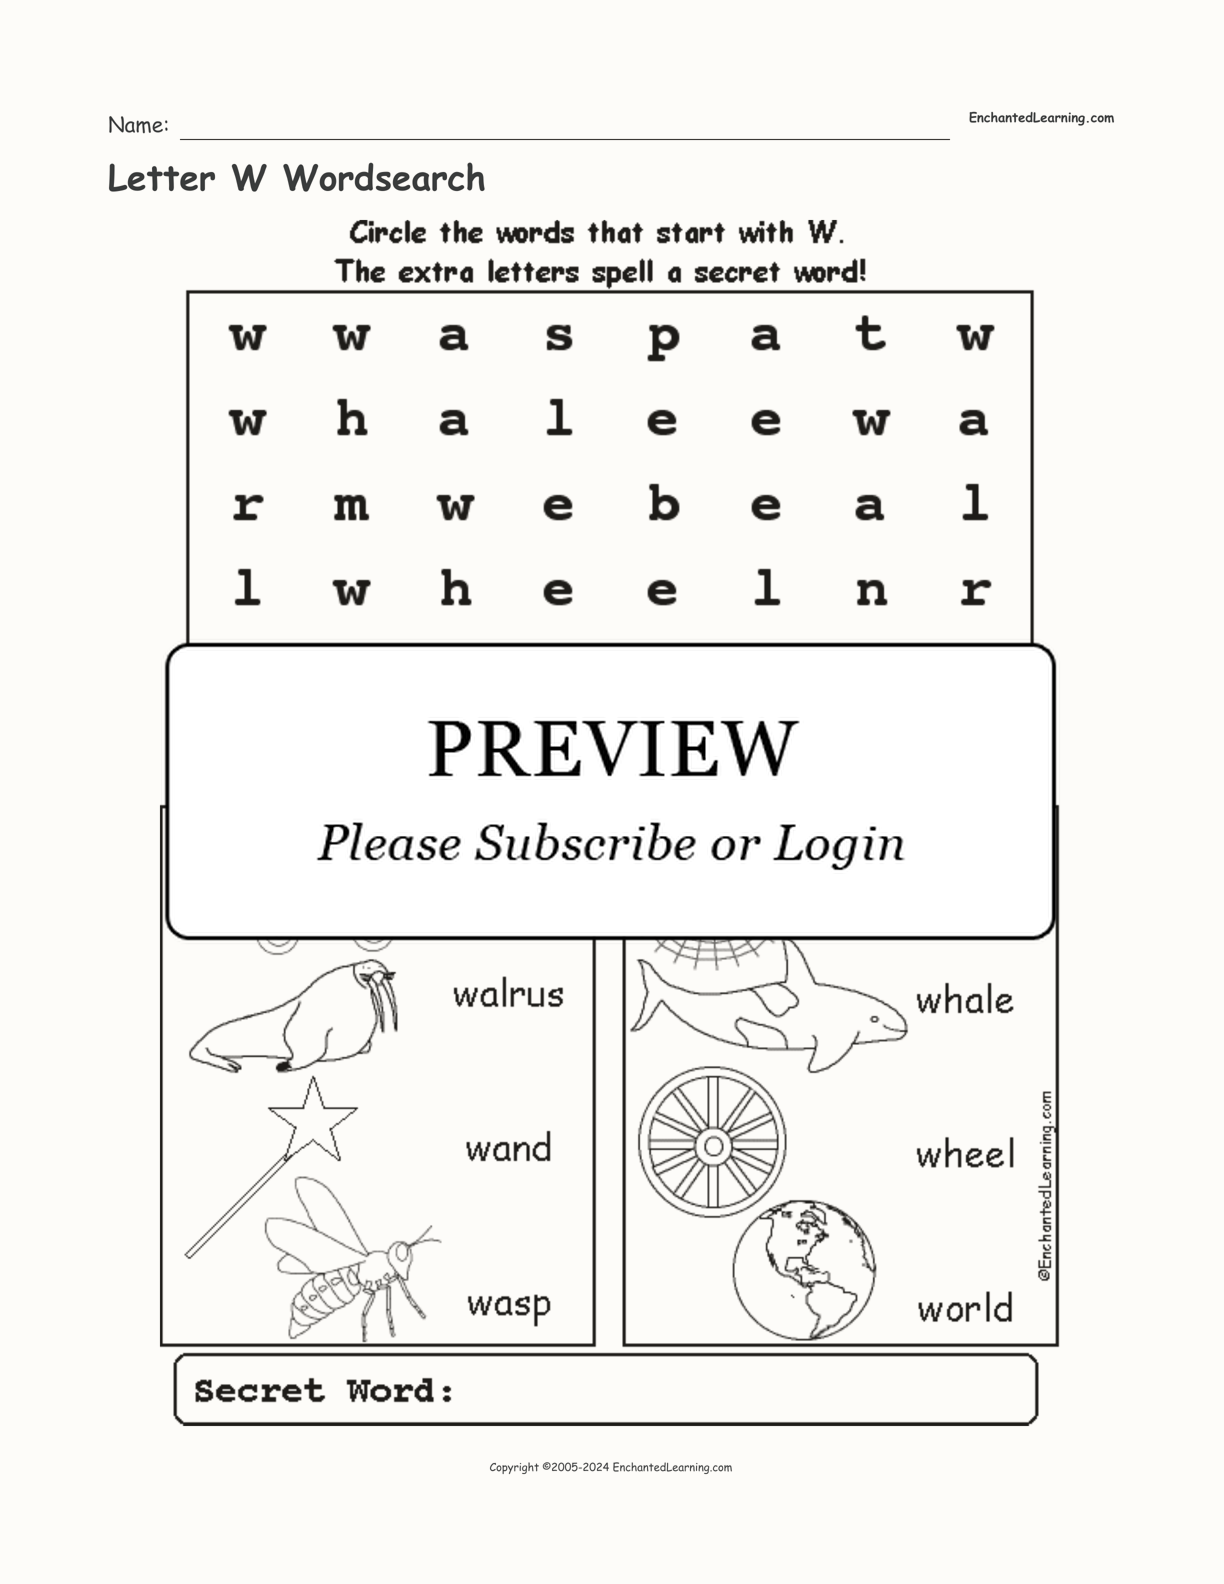 Letter W Wordsearch interactive worksheet page 1